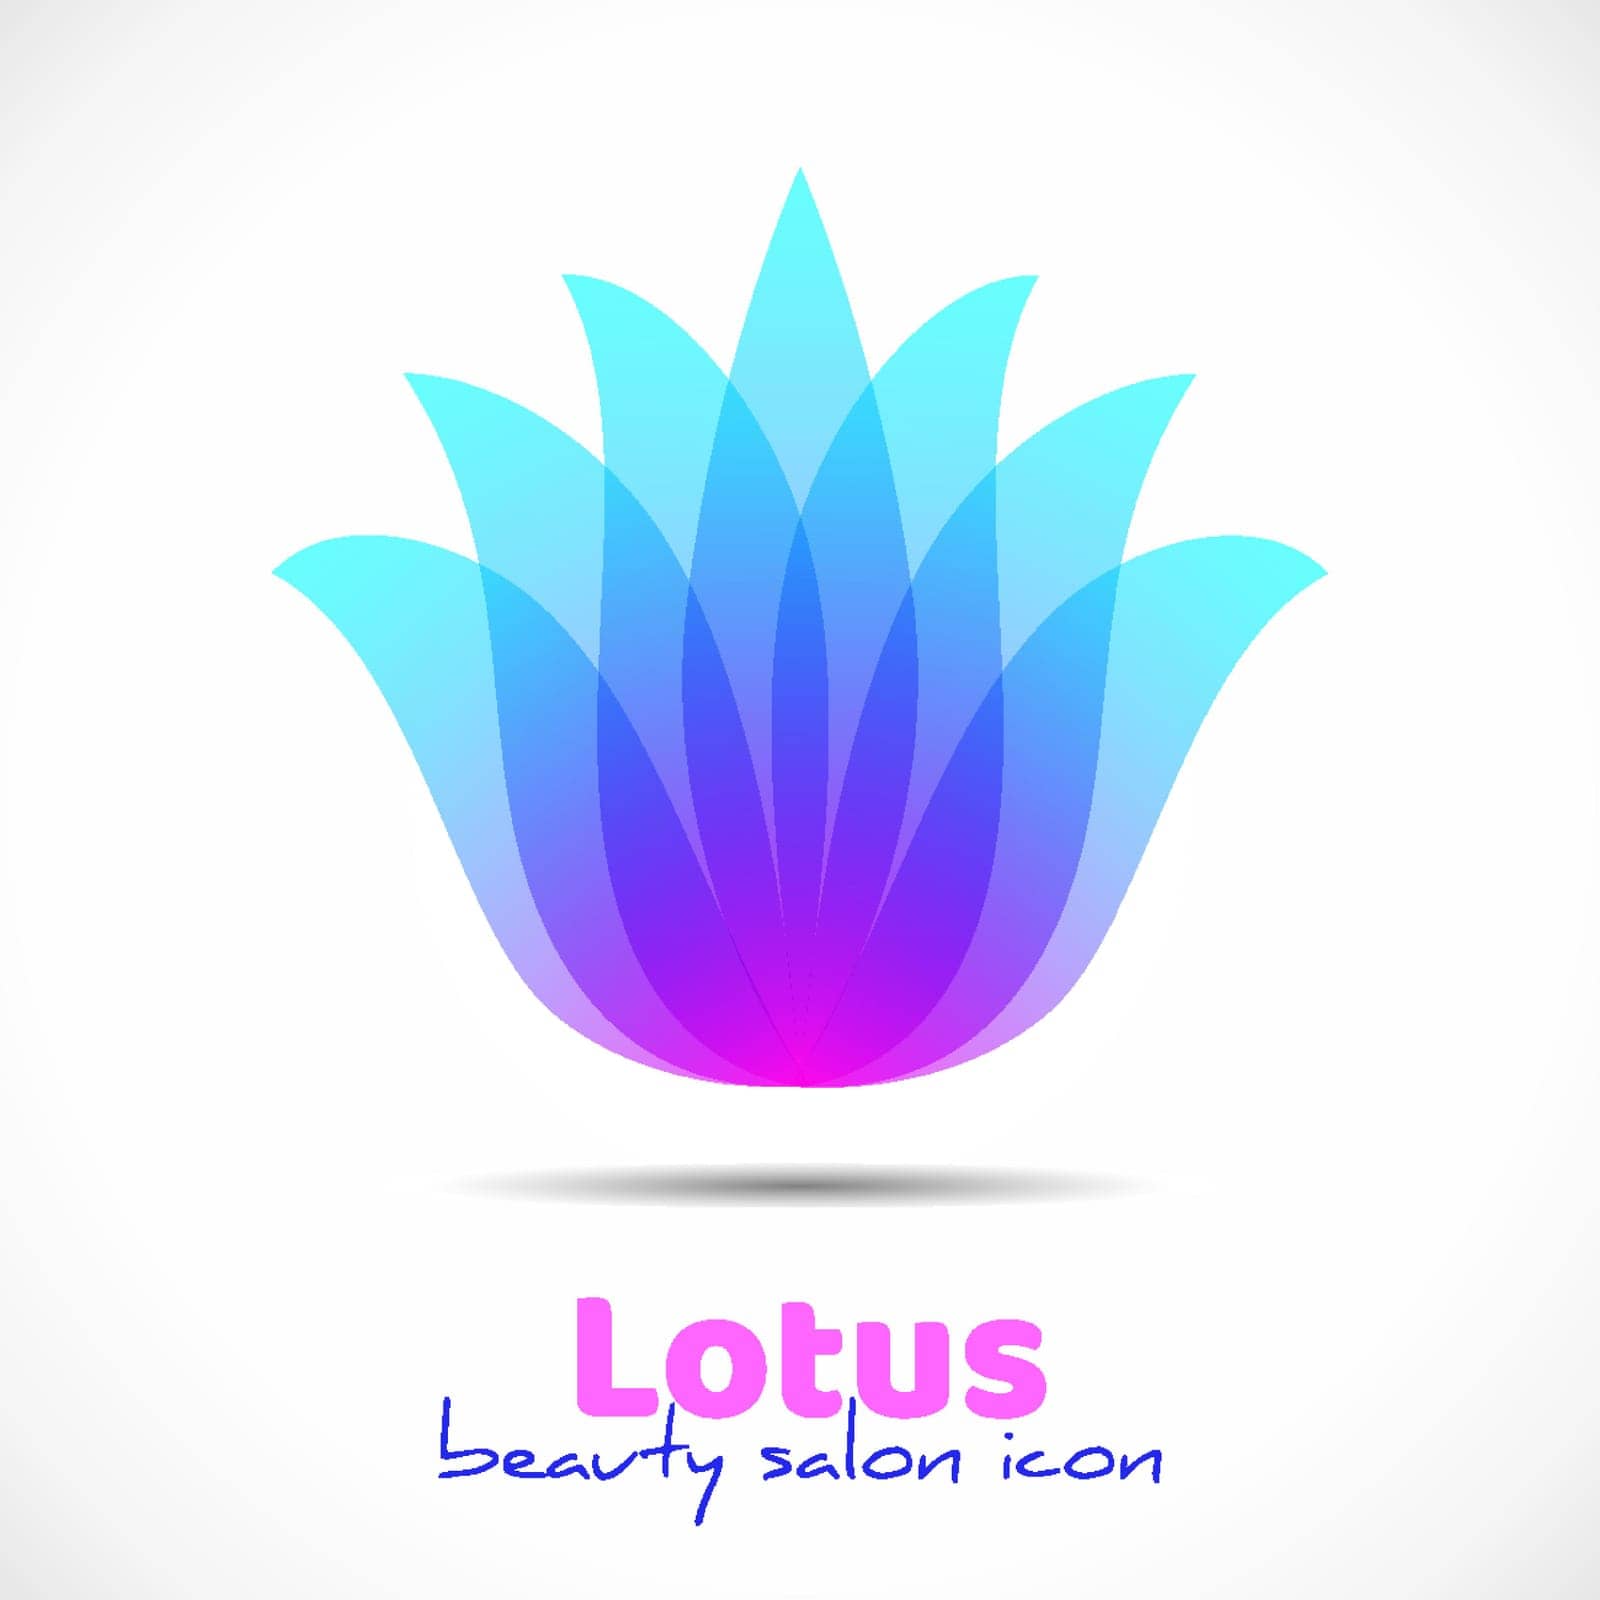 Lotus logotype design template. Vector flower symbol for beauty salon, spa or cosmetics brand style by Fyuriy